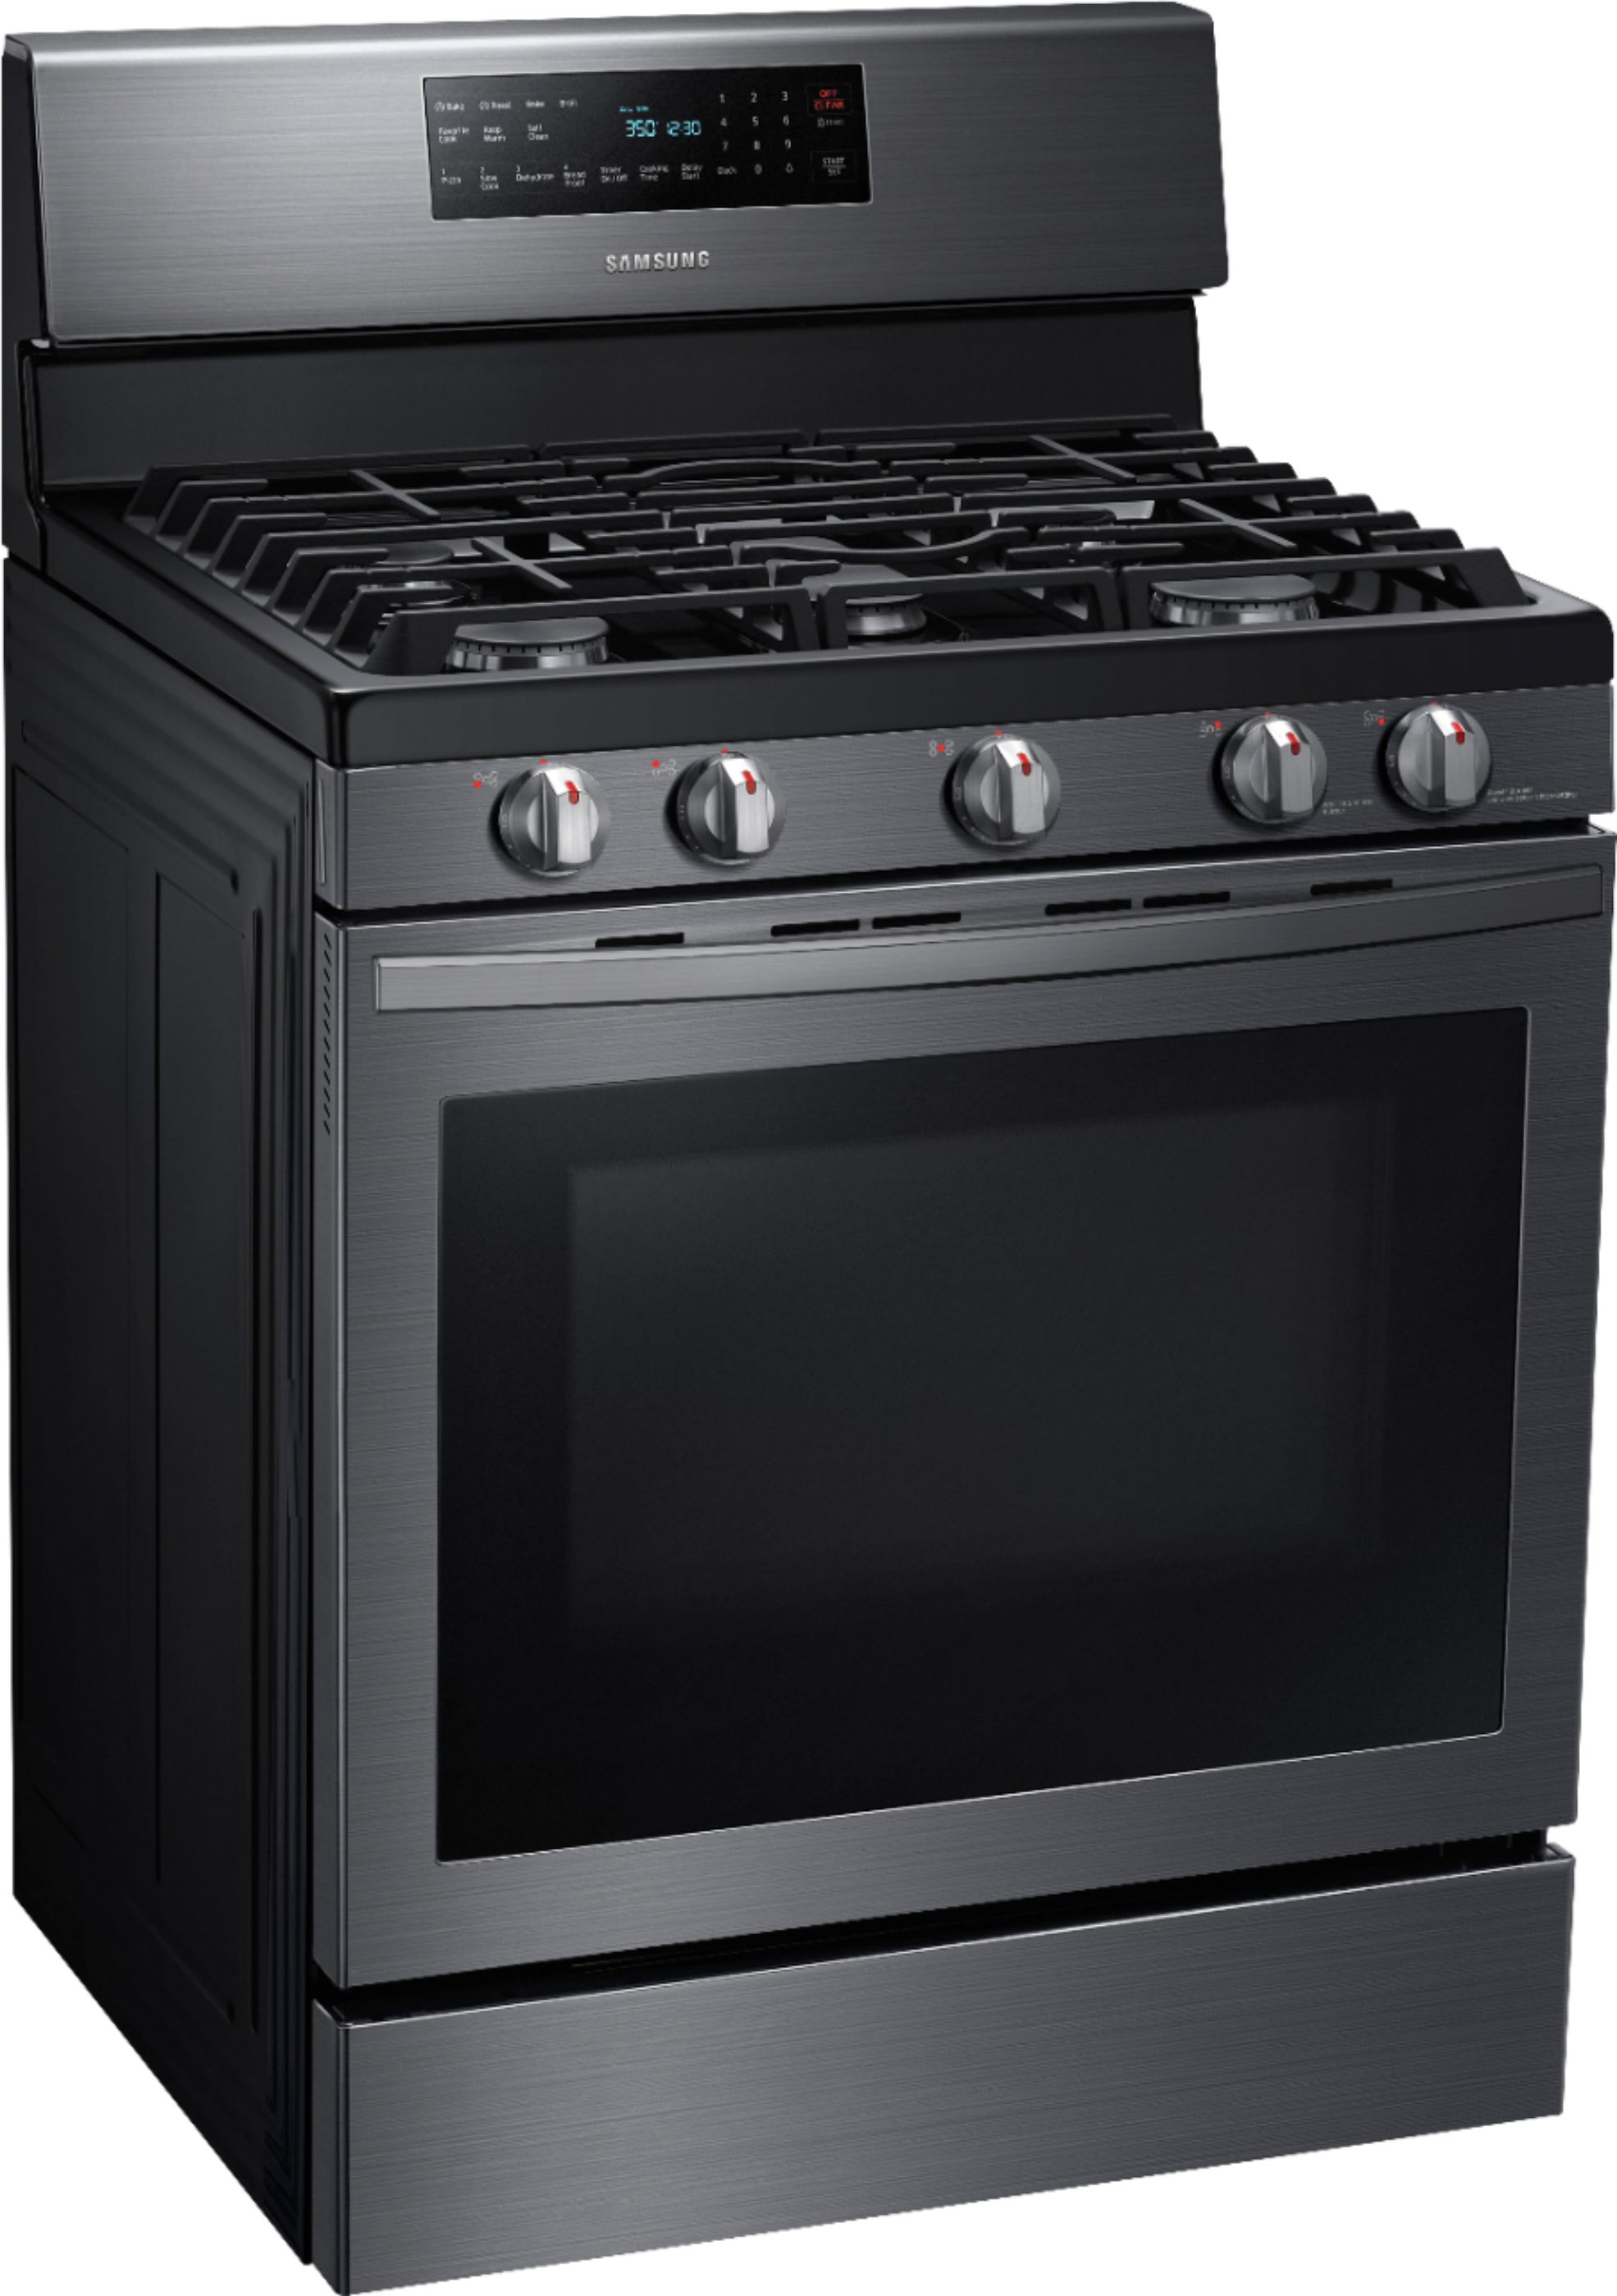 Angle View: Samsung - 5.8 Cu. Ft. Freestanding Gas Convection Range with Air Fry, Fingerprint Resistant - Black stainless steel